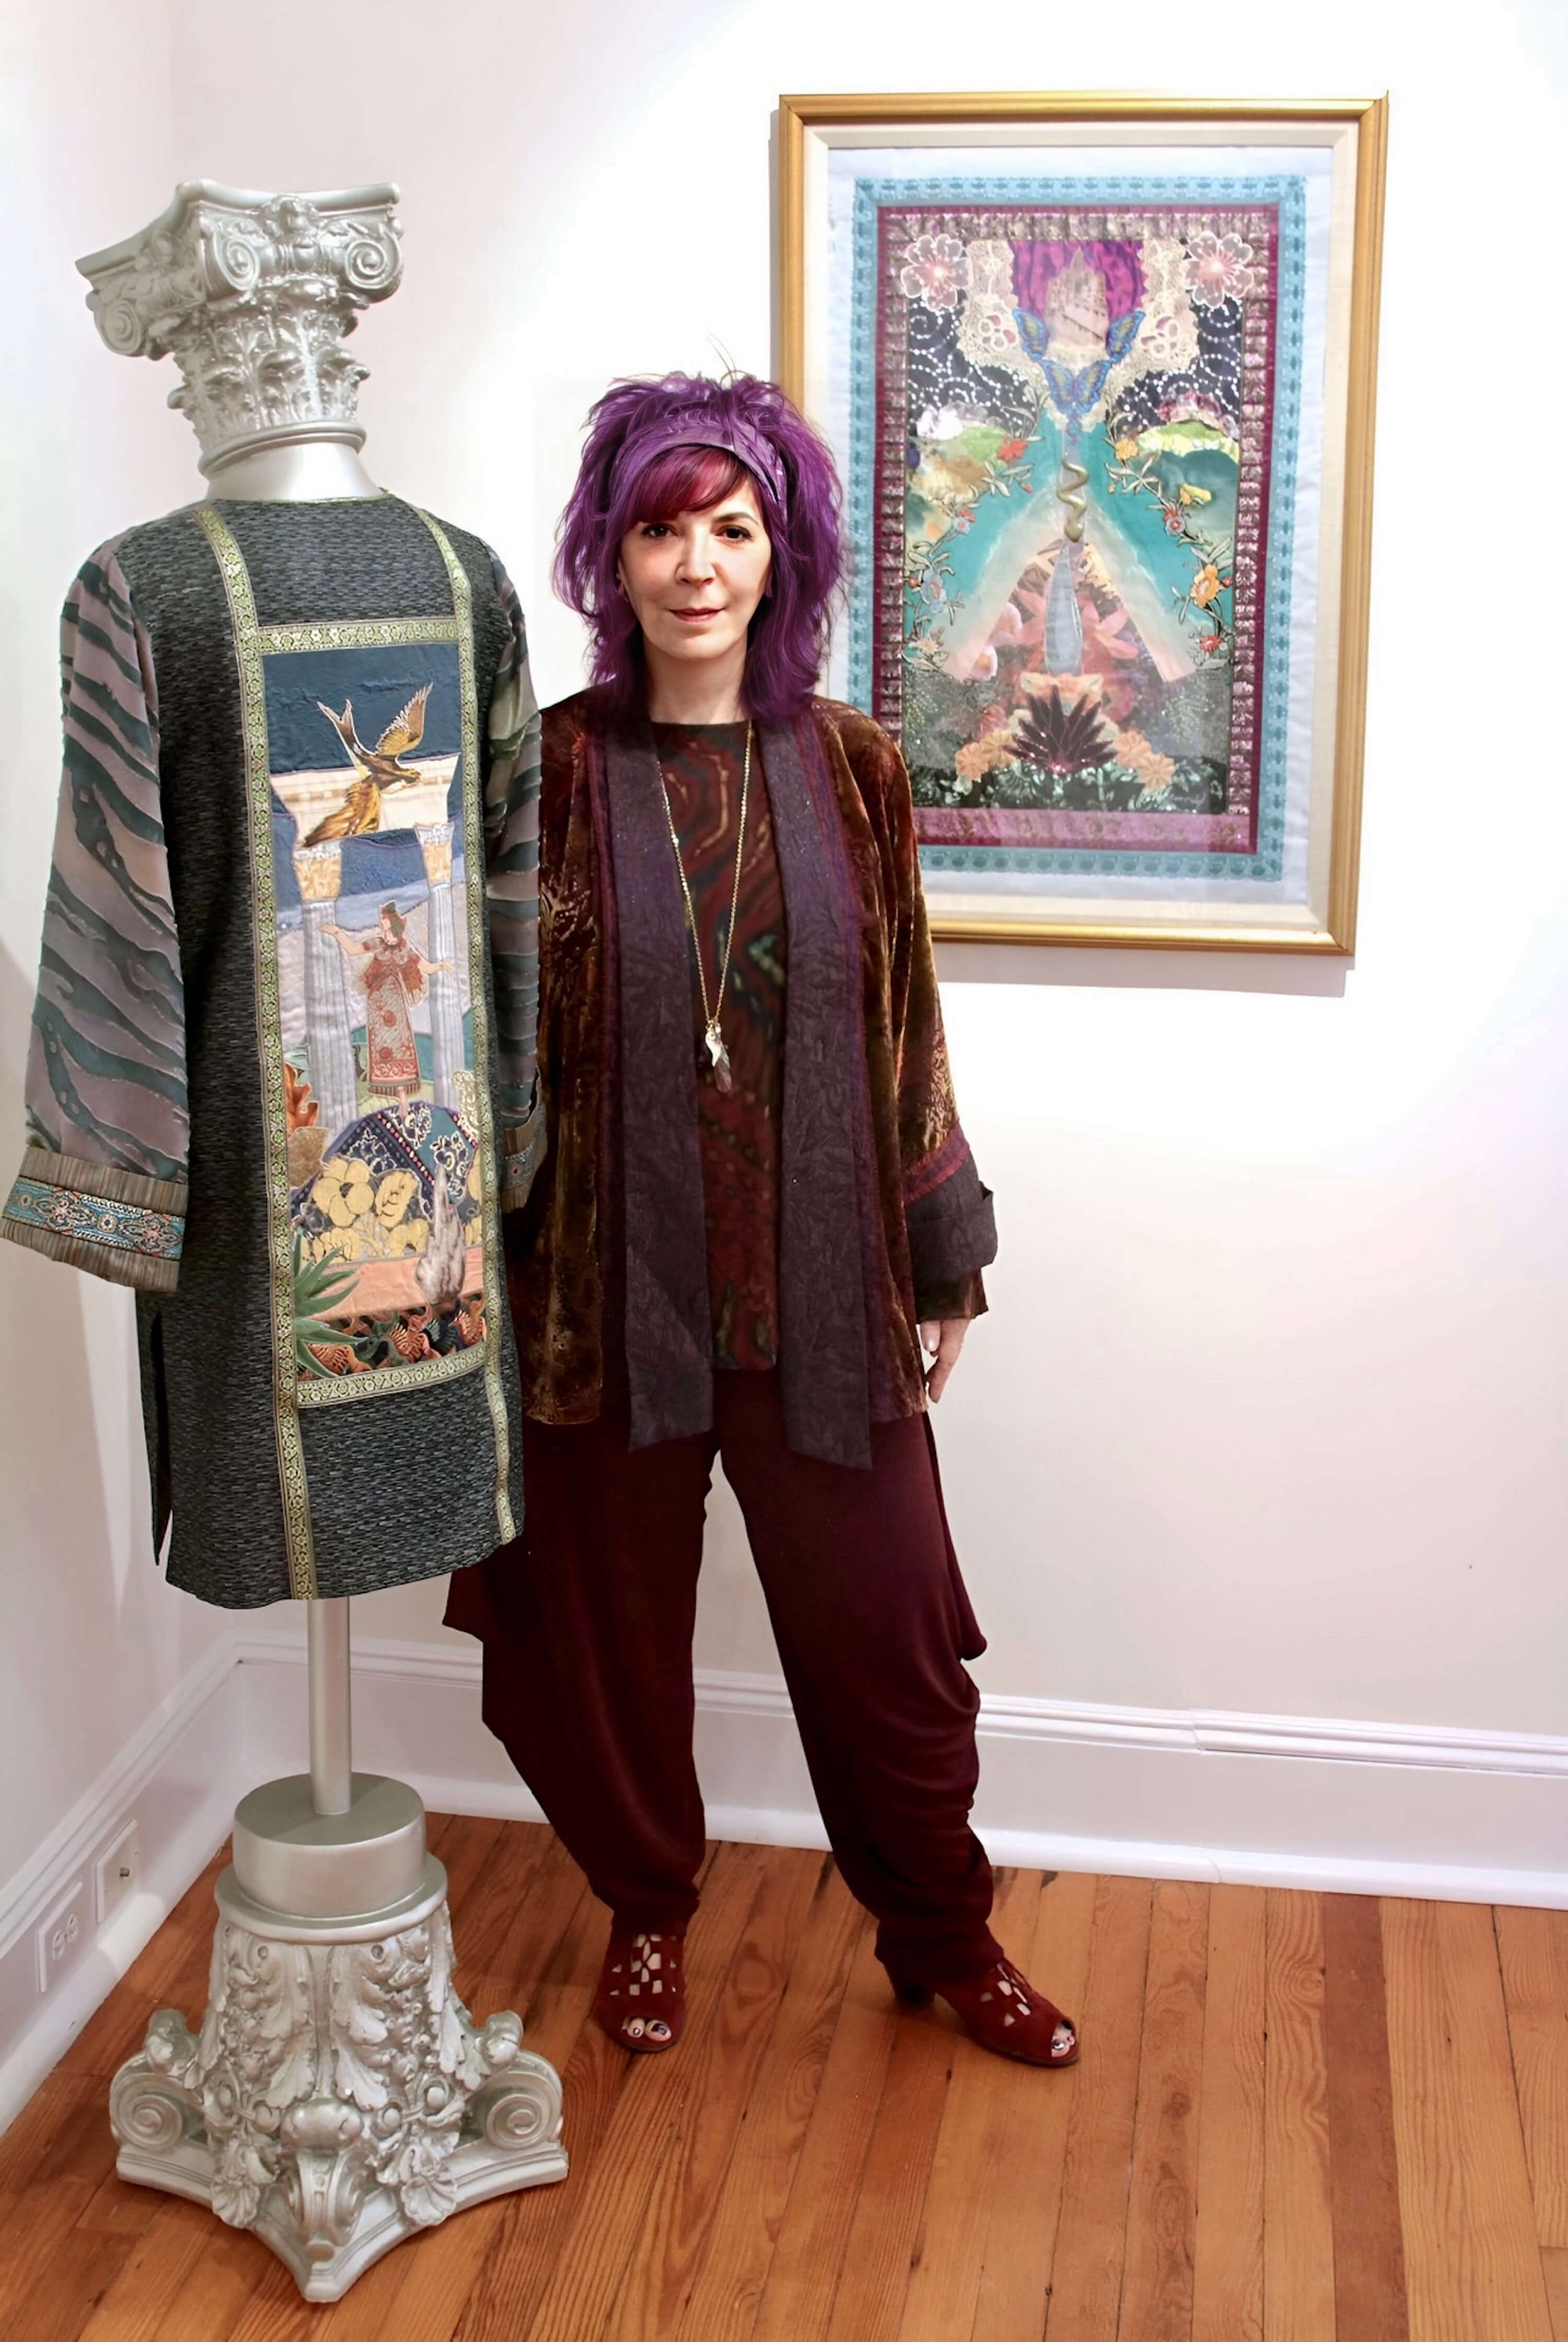 Amy Zerner with her tapestry and and art couture on display